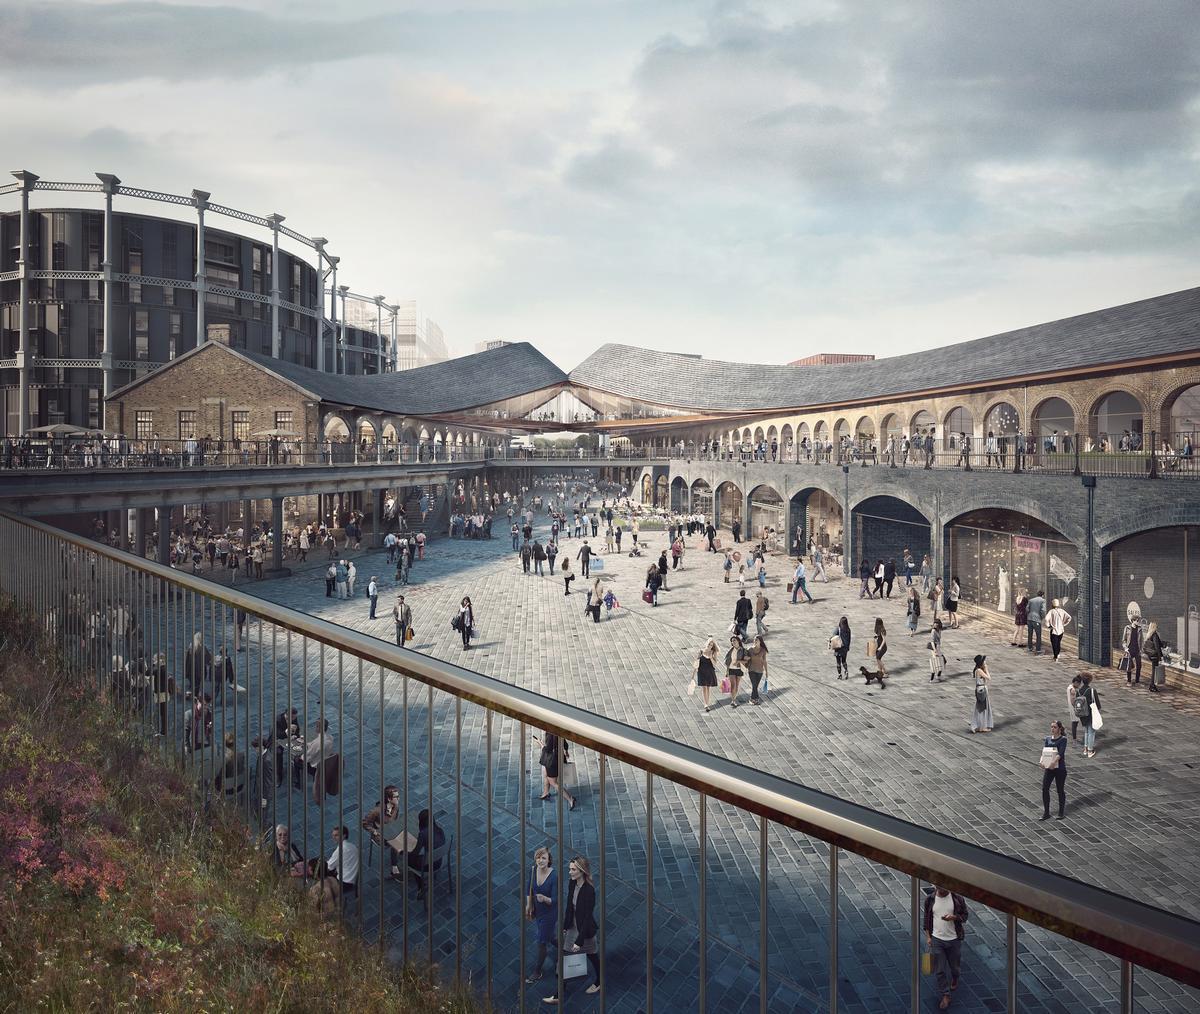 Two disused Victorian coal drop buildings at King's Cross railway station are being transformed into 100,000sq m (1m sq ft) of culture and leisure space / Heatherwick Studio